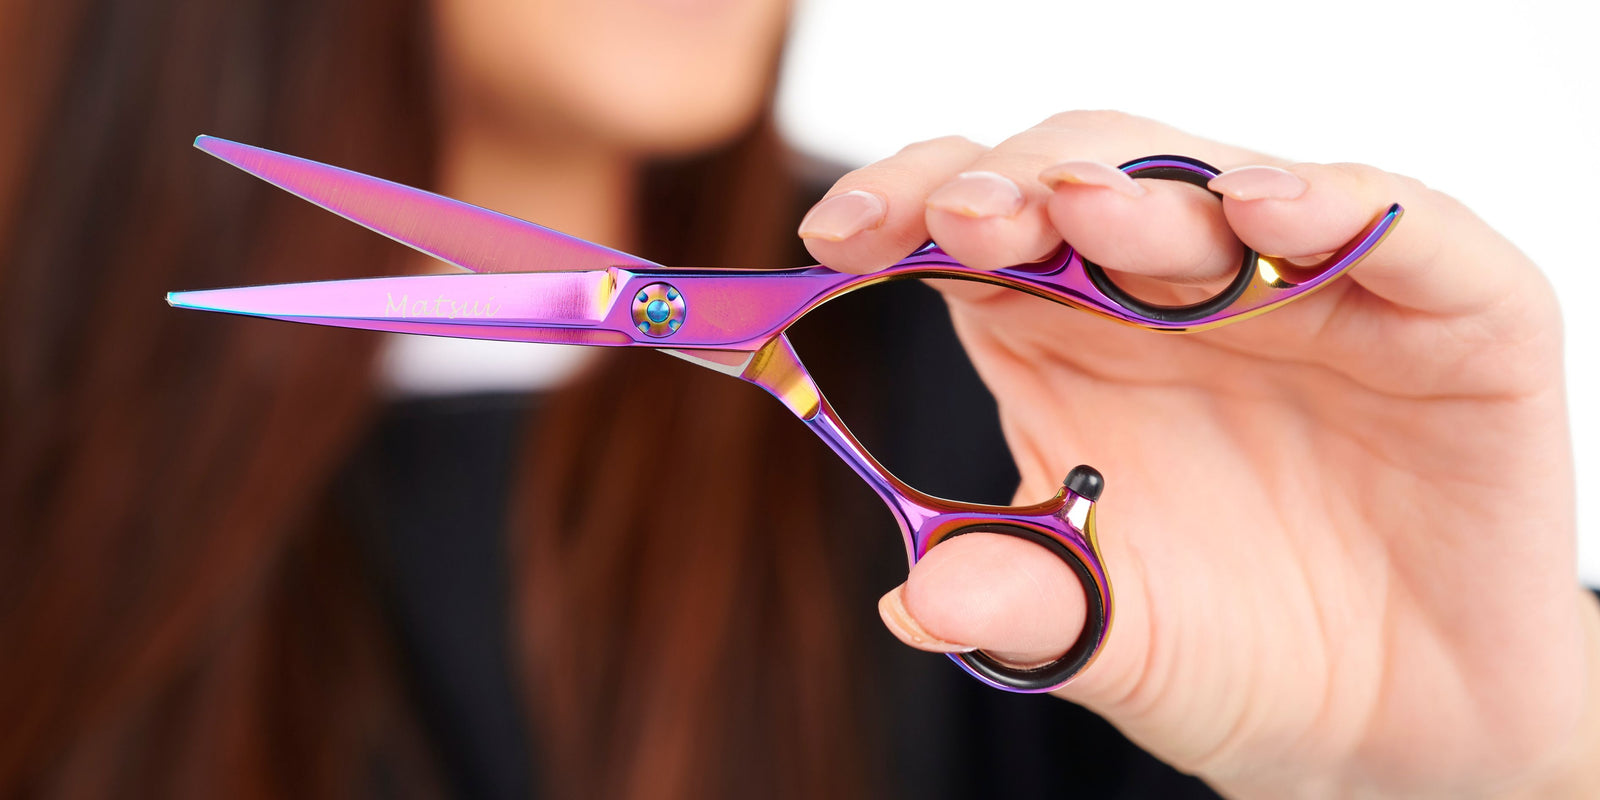 How to Hold Hairdressing Scissors Correctly